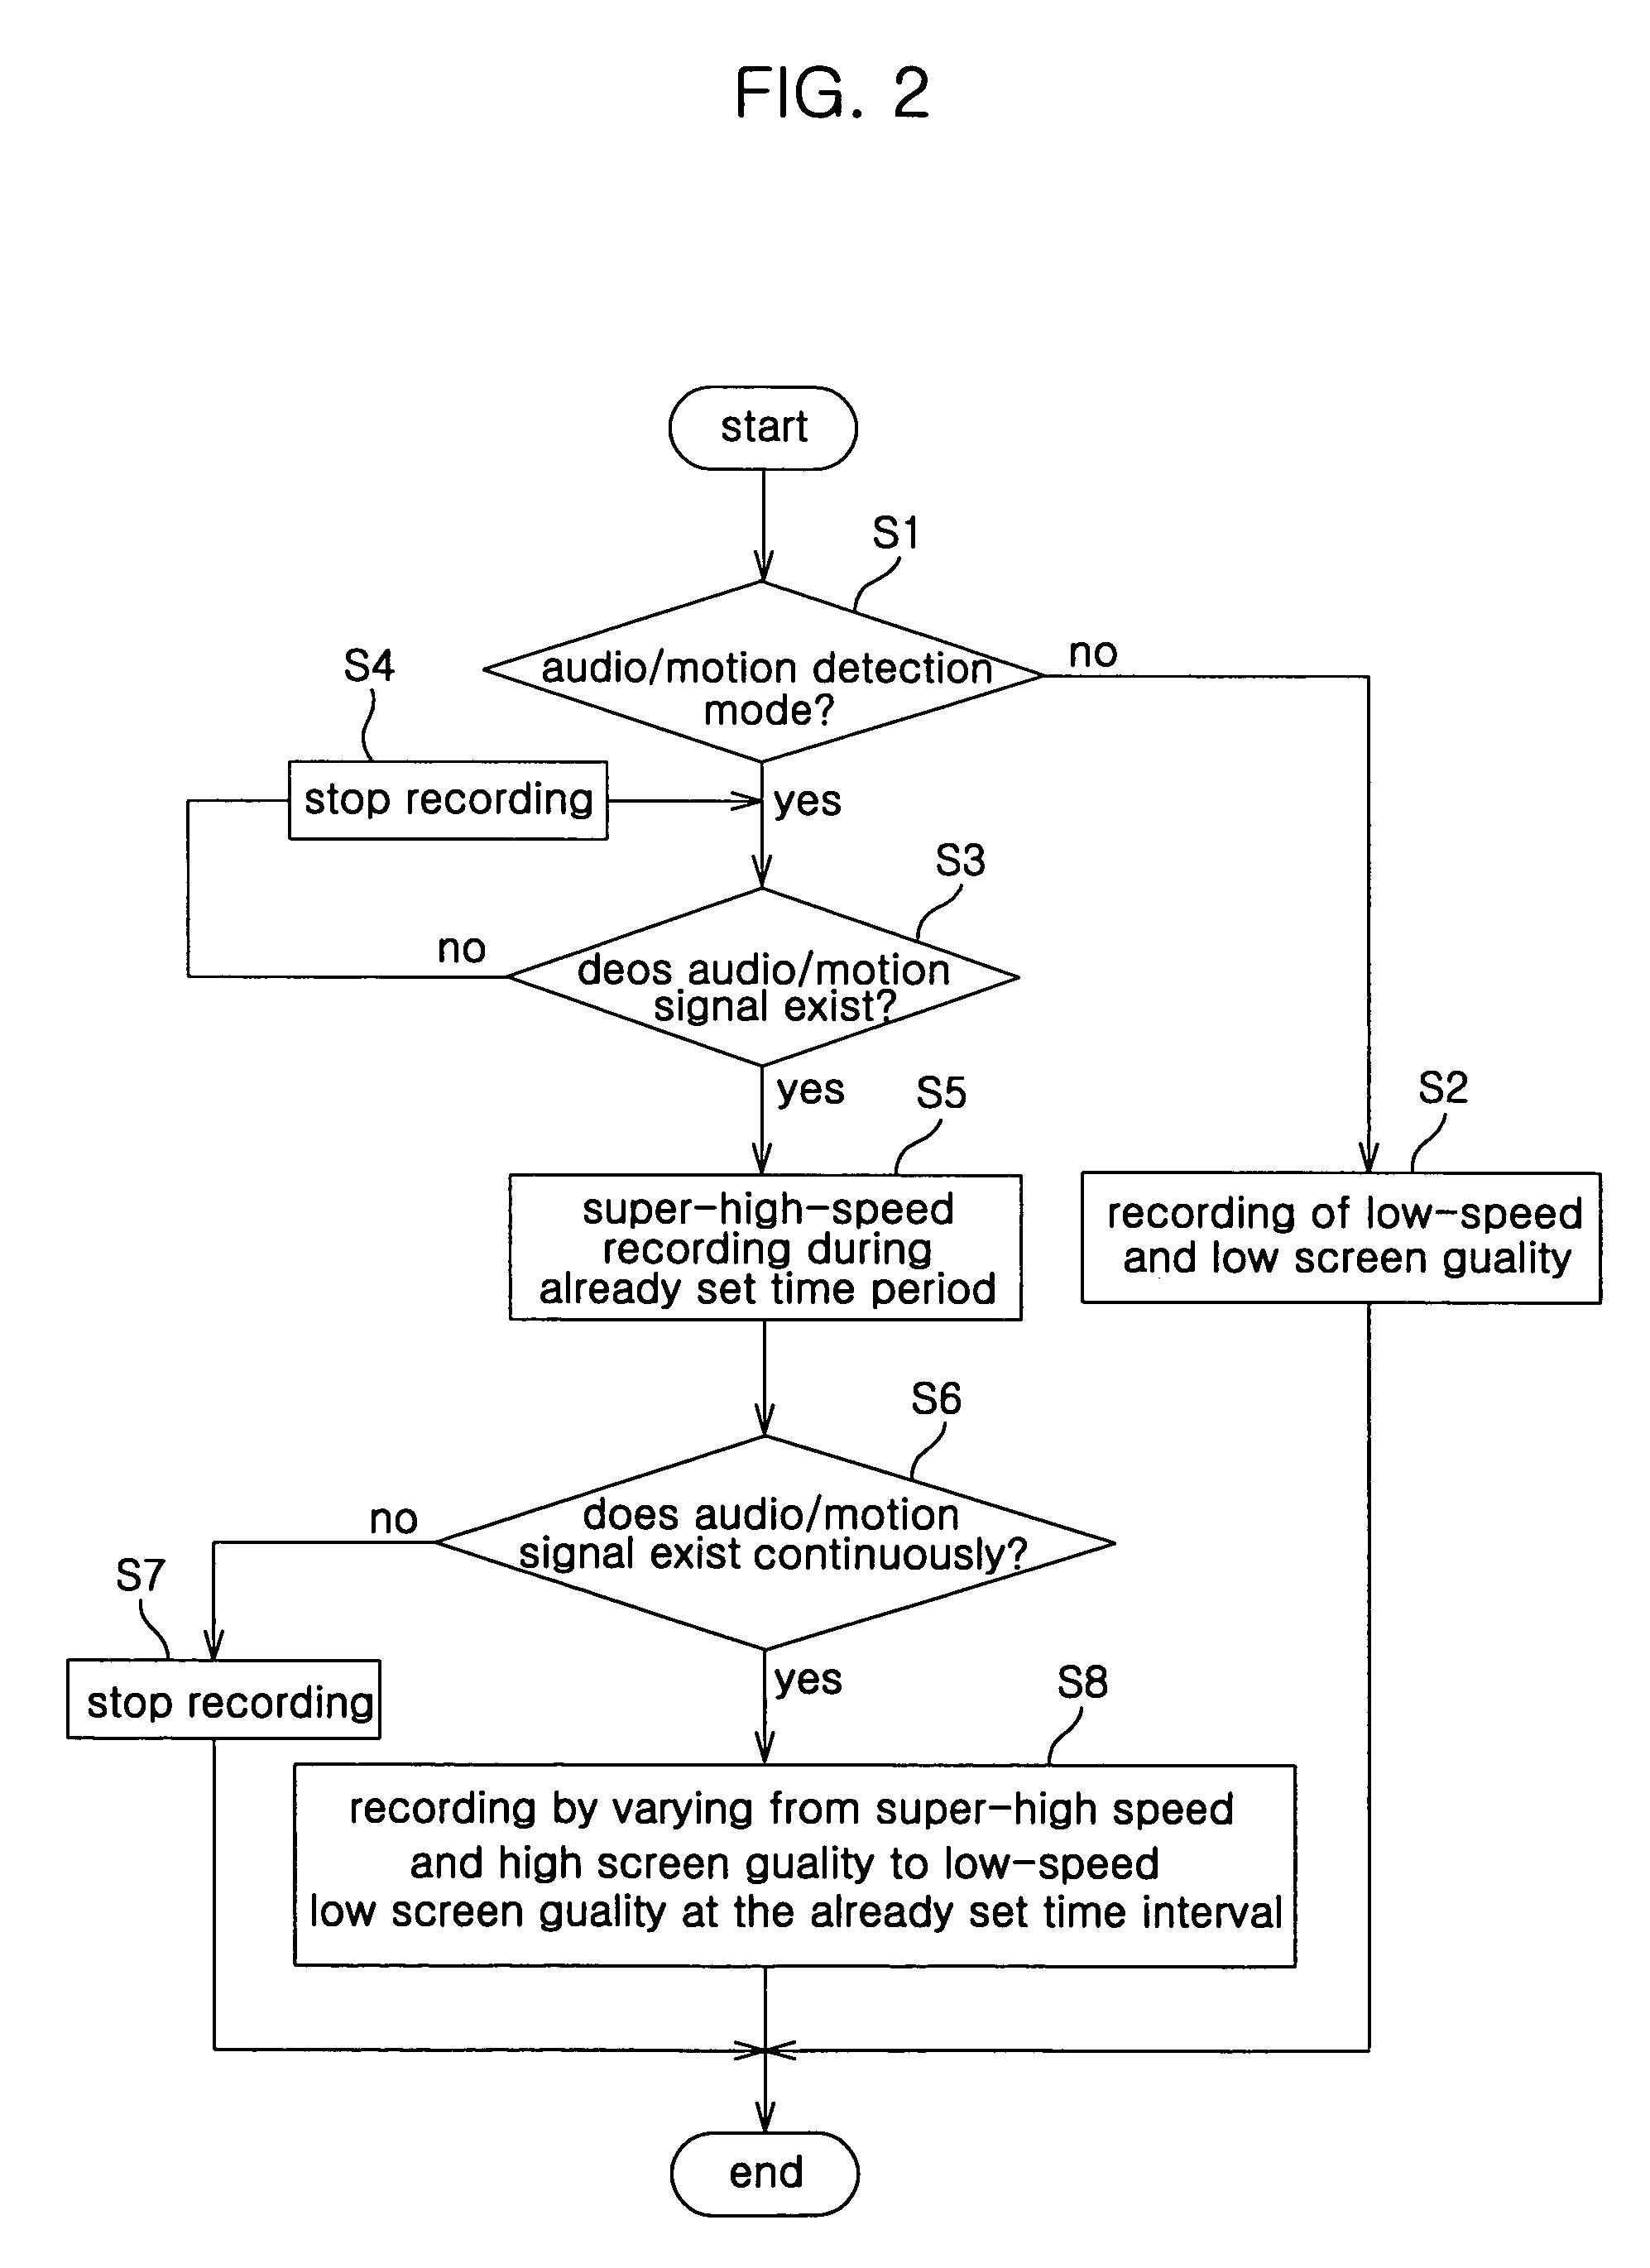 Digital video recording method in an audio detection mode